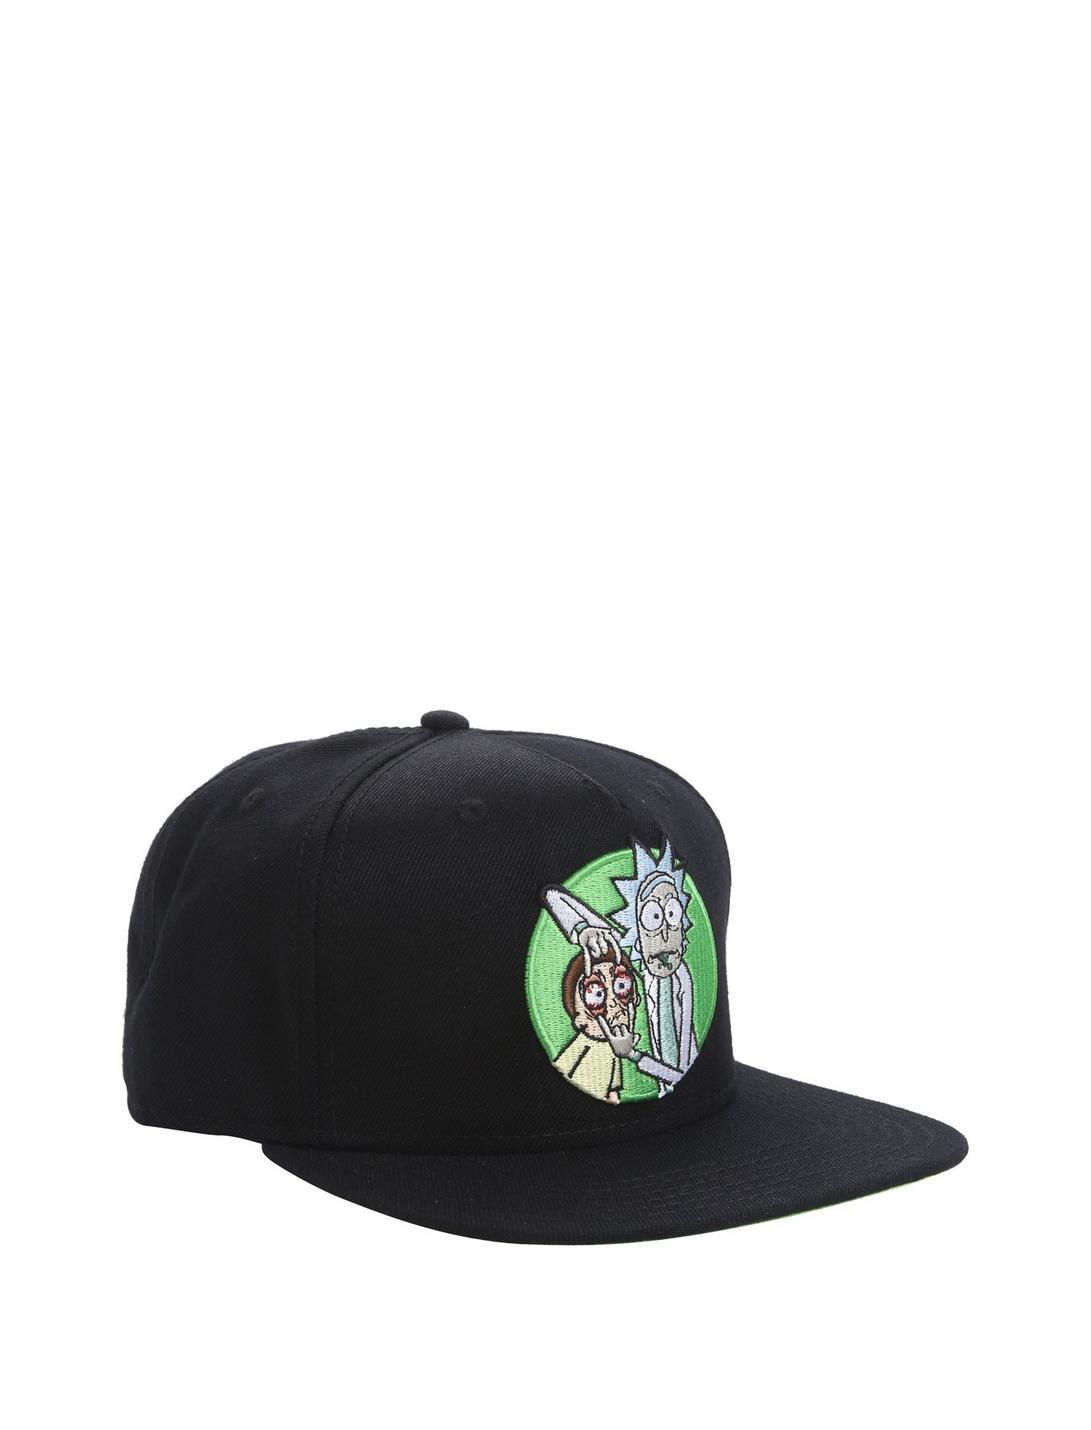 Rick And Morty Open Your Eyes Snapback Hat, , hi-res